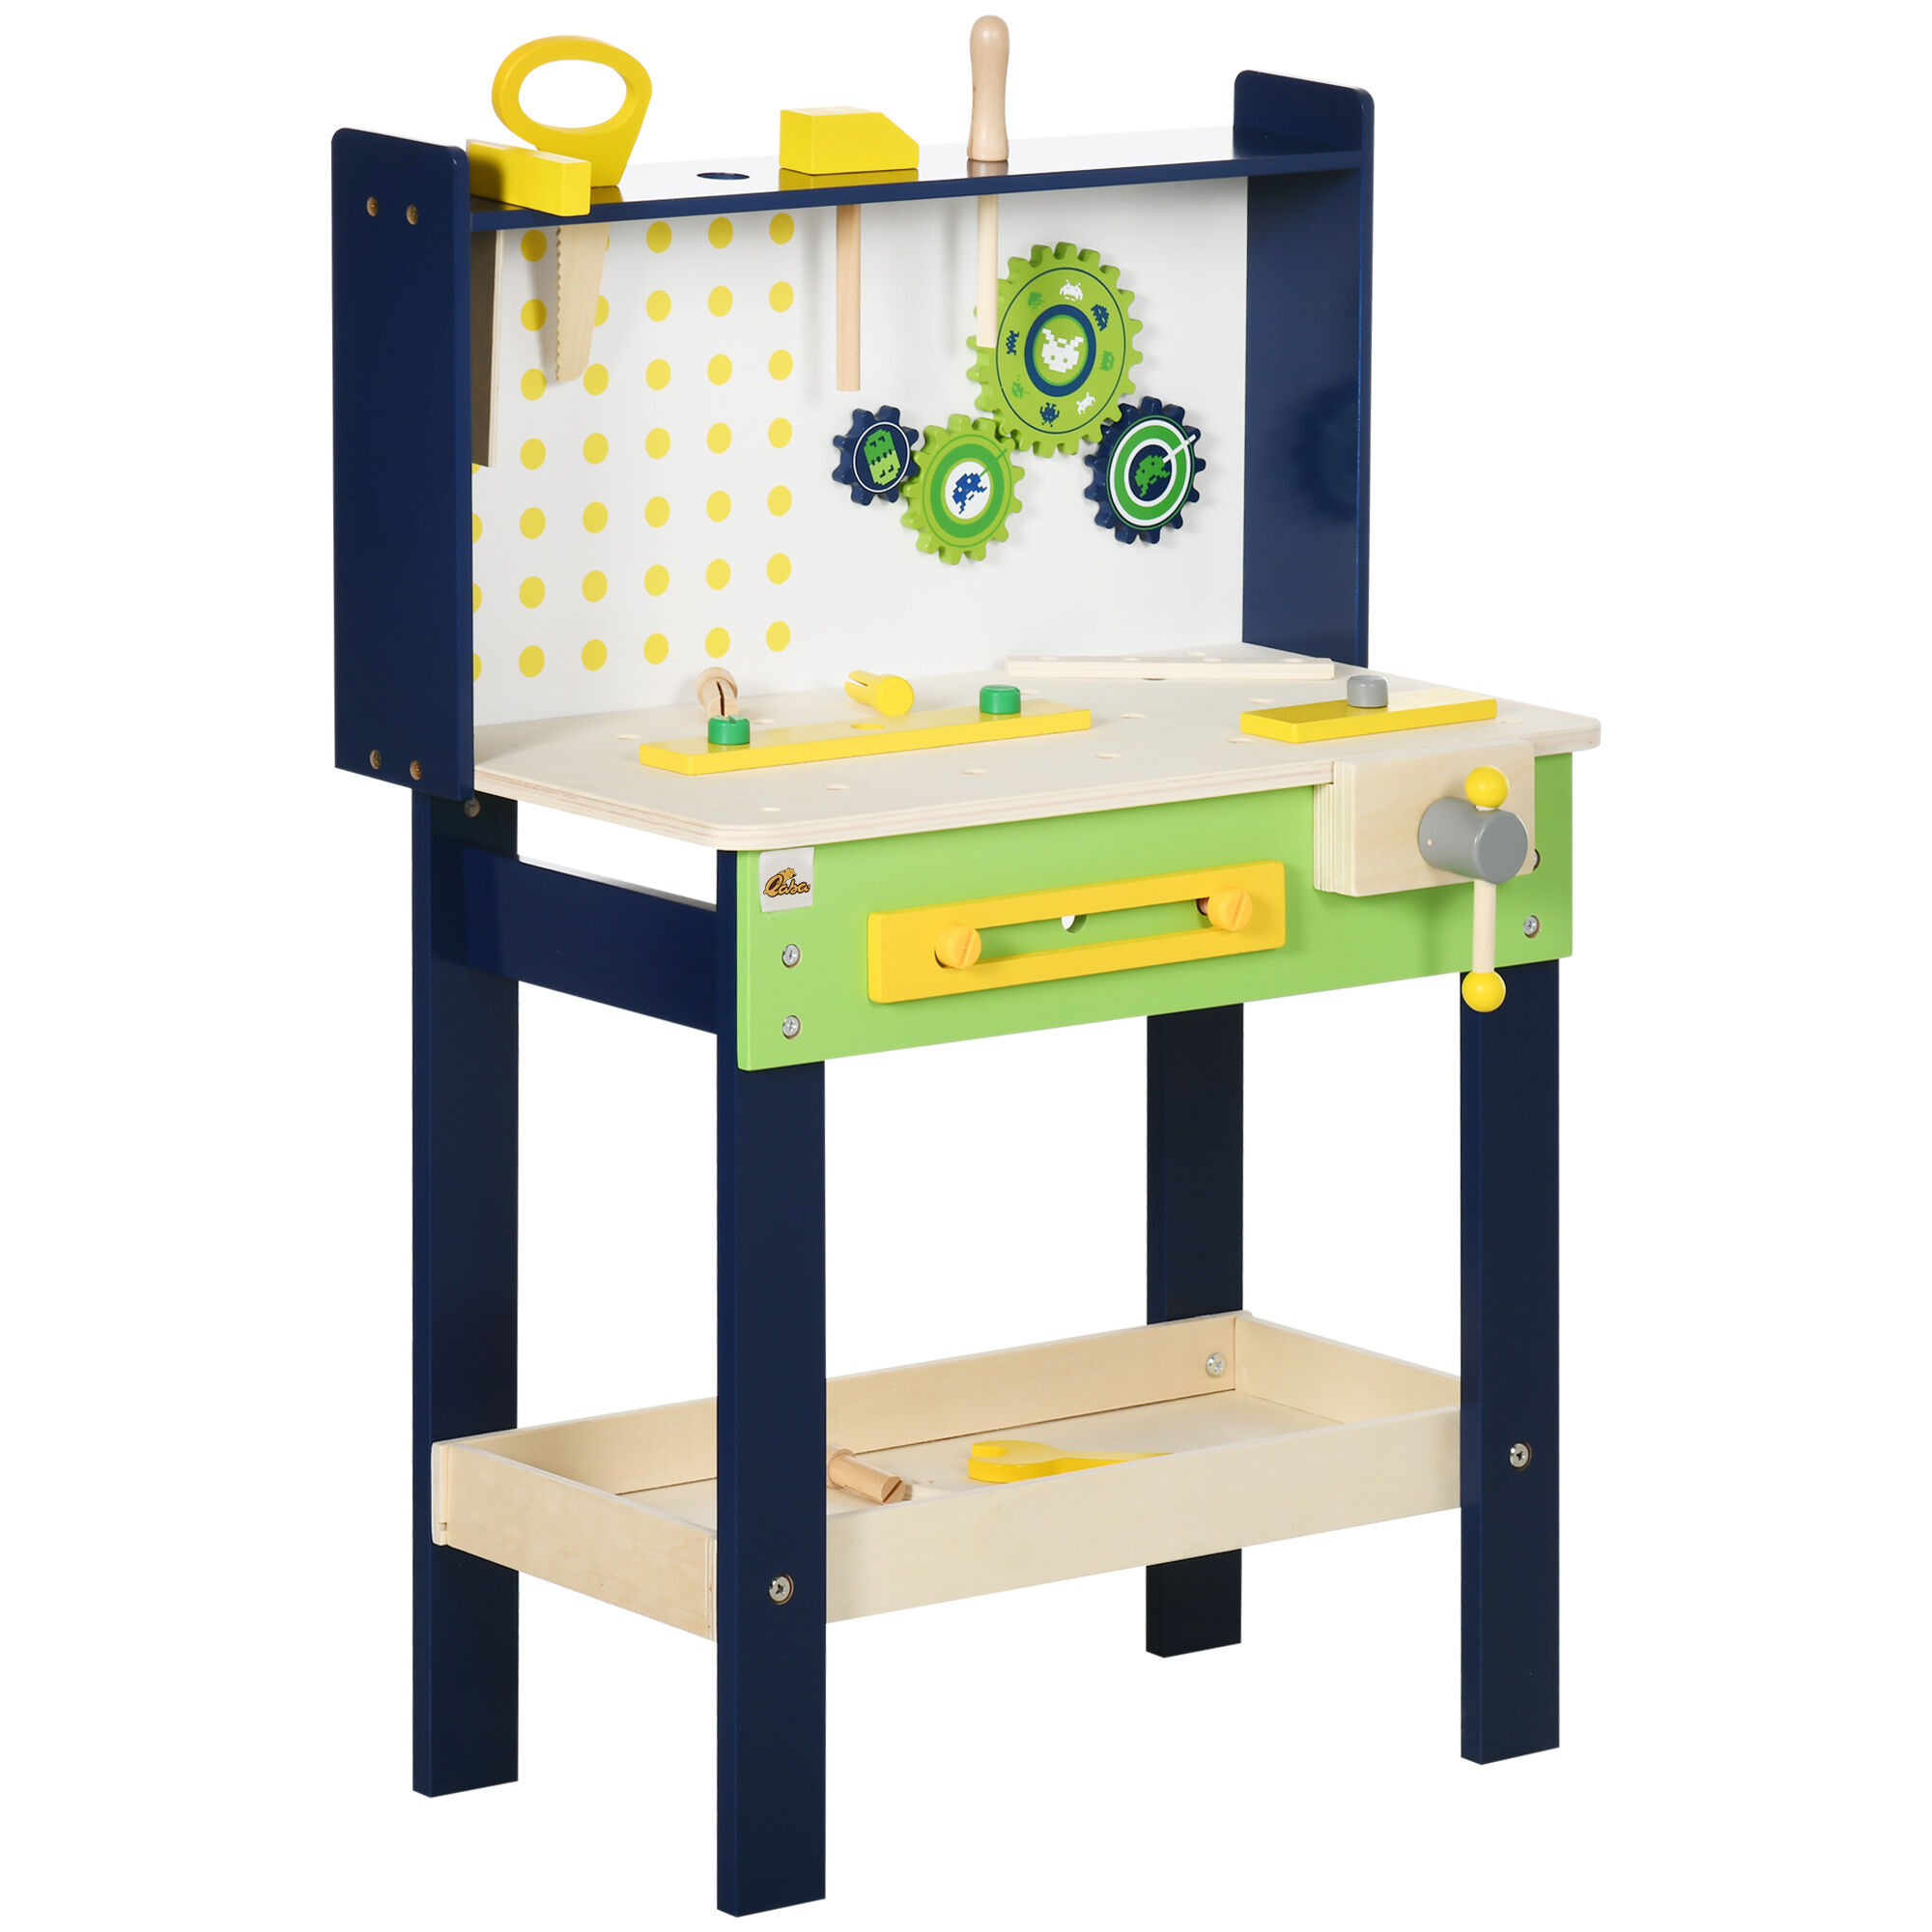 Qaba Toddler Tool Bench   27 Piece Kit   Construction Work Shop Toy for Ages 3-6   Interactive Kids Workbench Playset Gift   Aosom.com